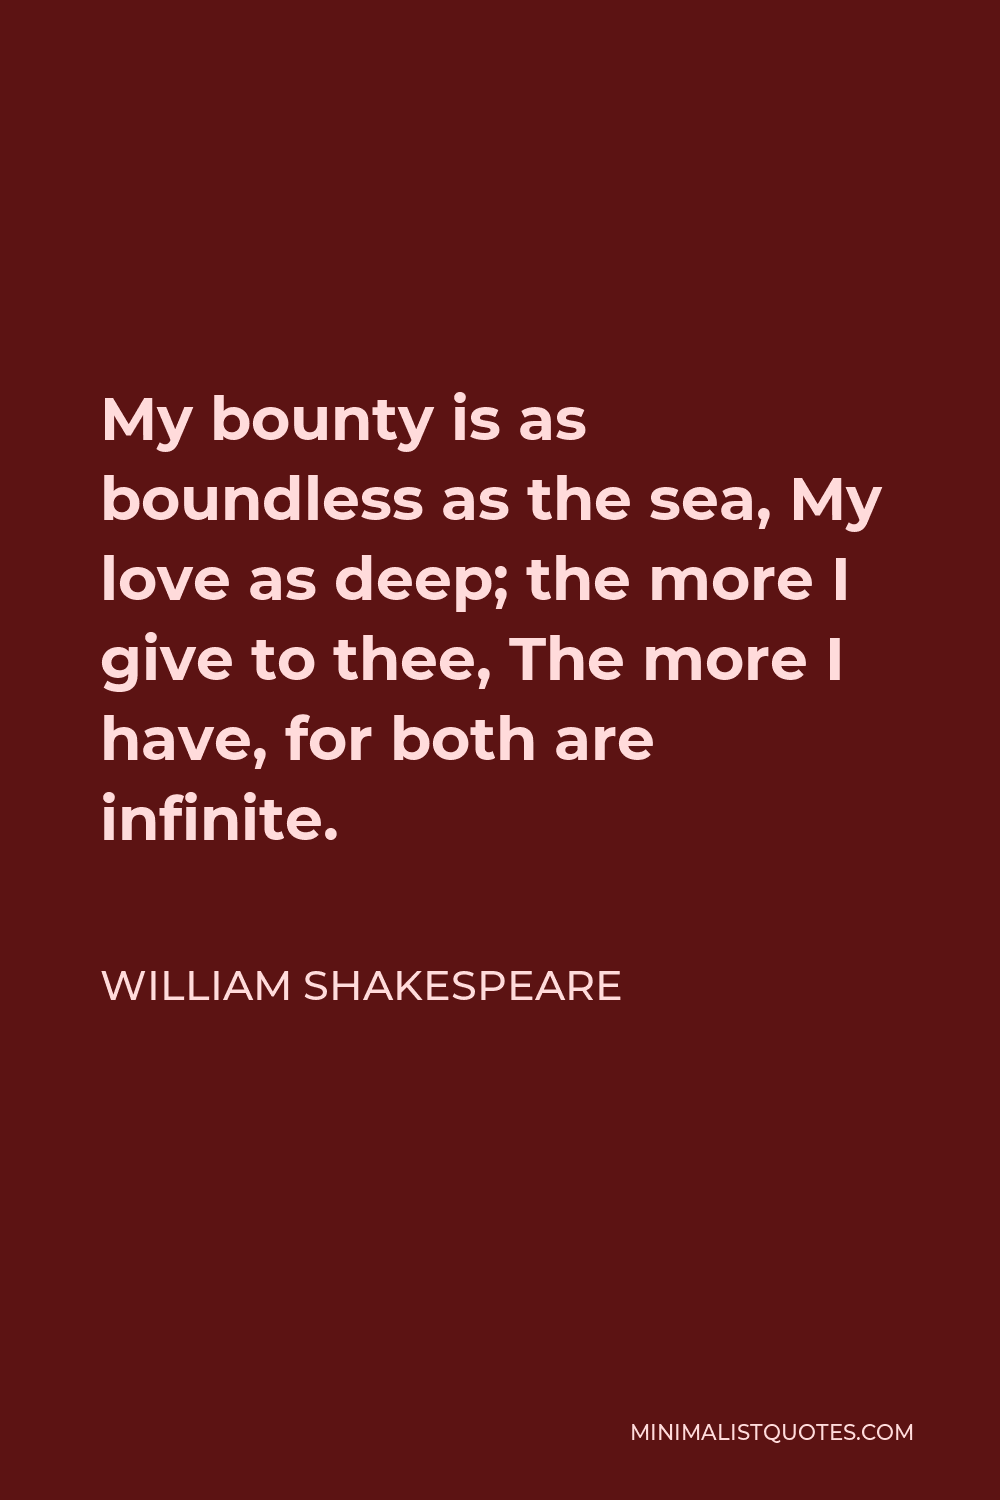 William Shakespeare Quote - My bounty is as boundless as the sea, My love as deep; the more I give to thee, The more I have, for both are infinite.